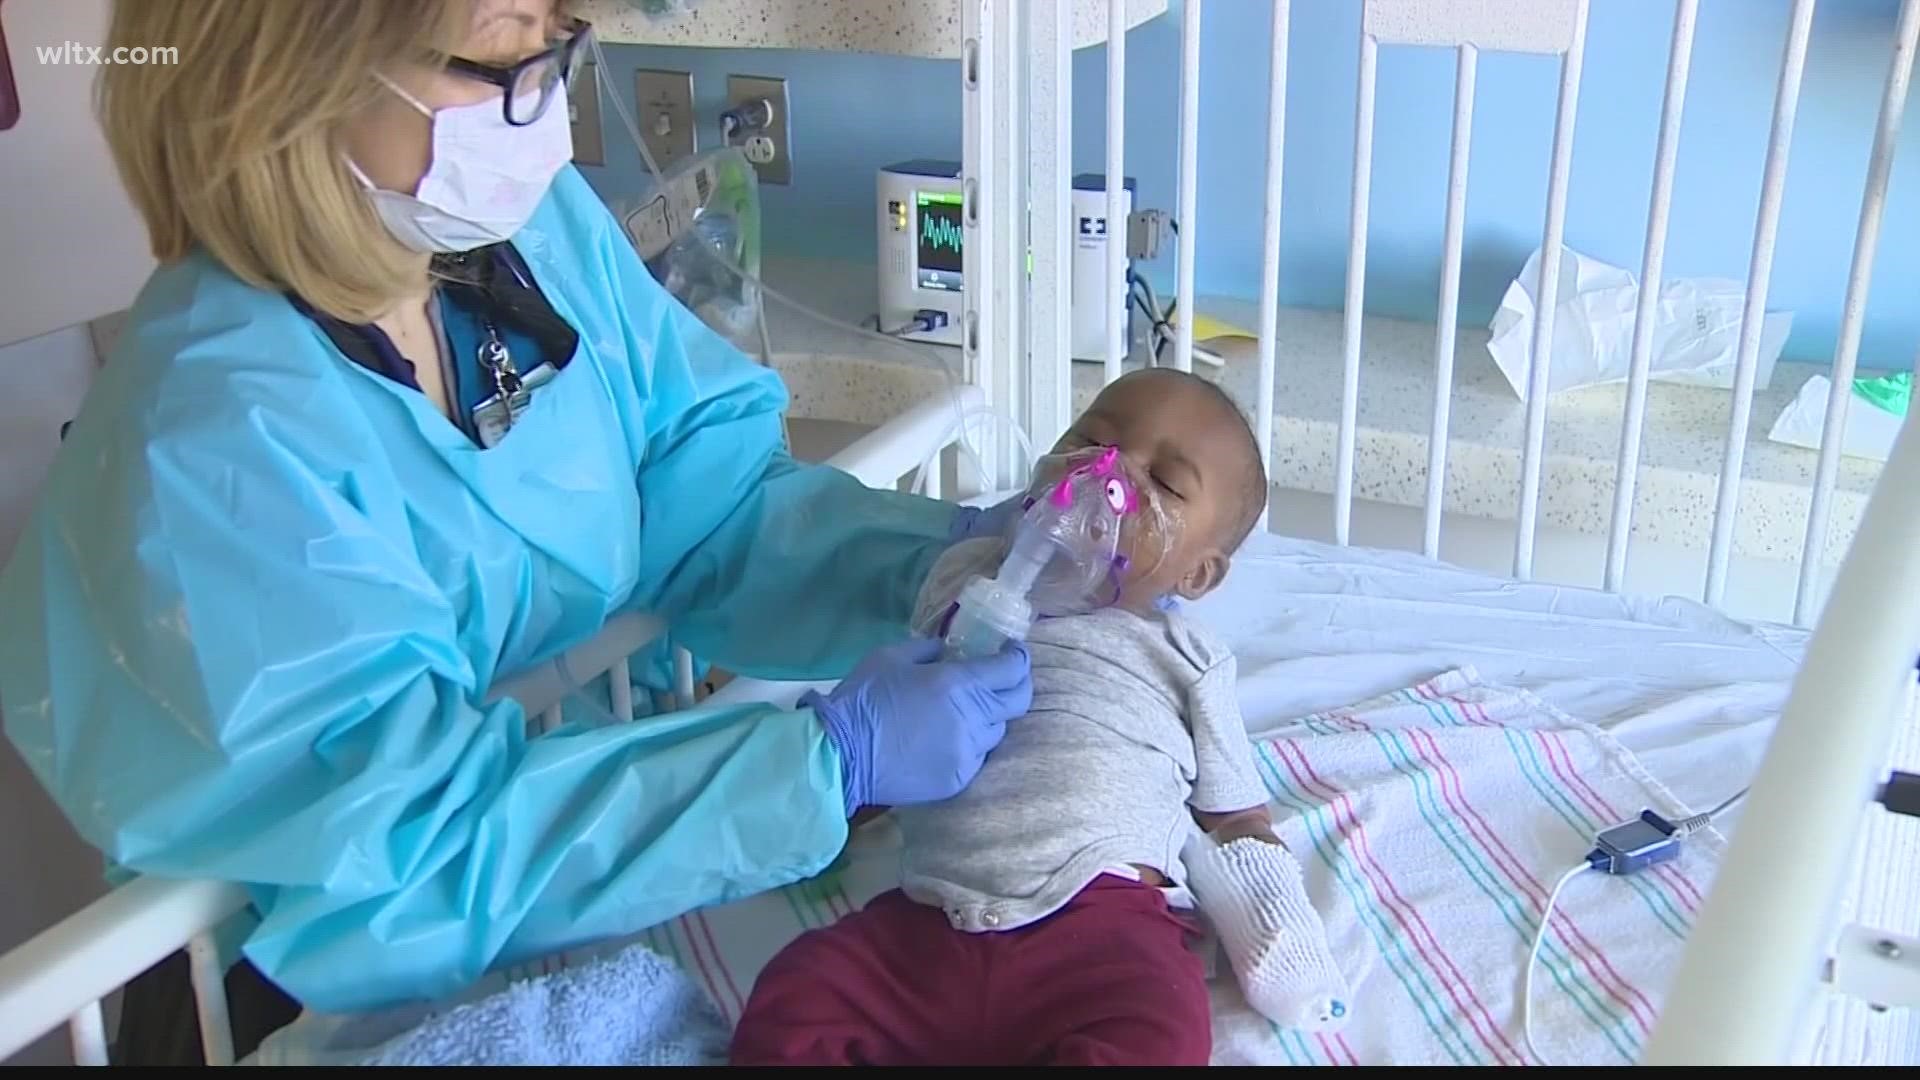 Midlands doctors are warning about an increase in RSV cases that is causing concern.